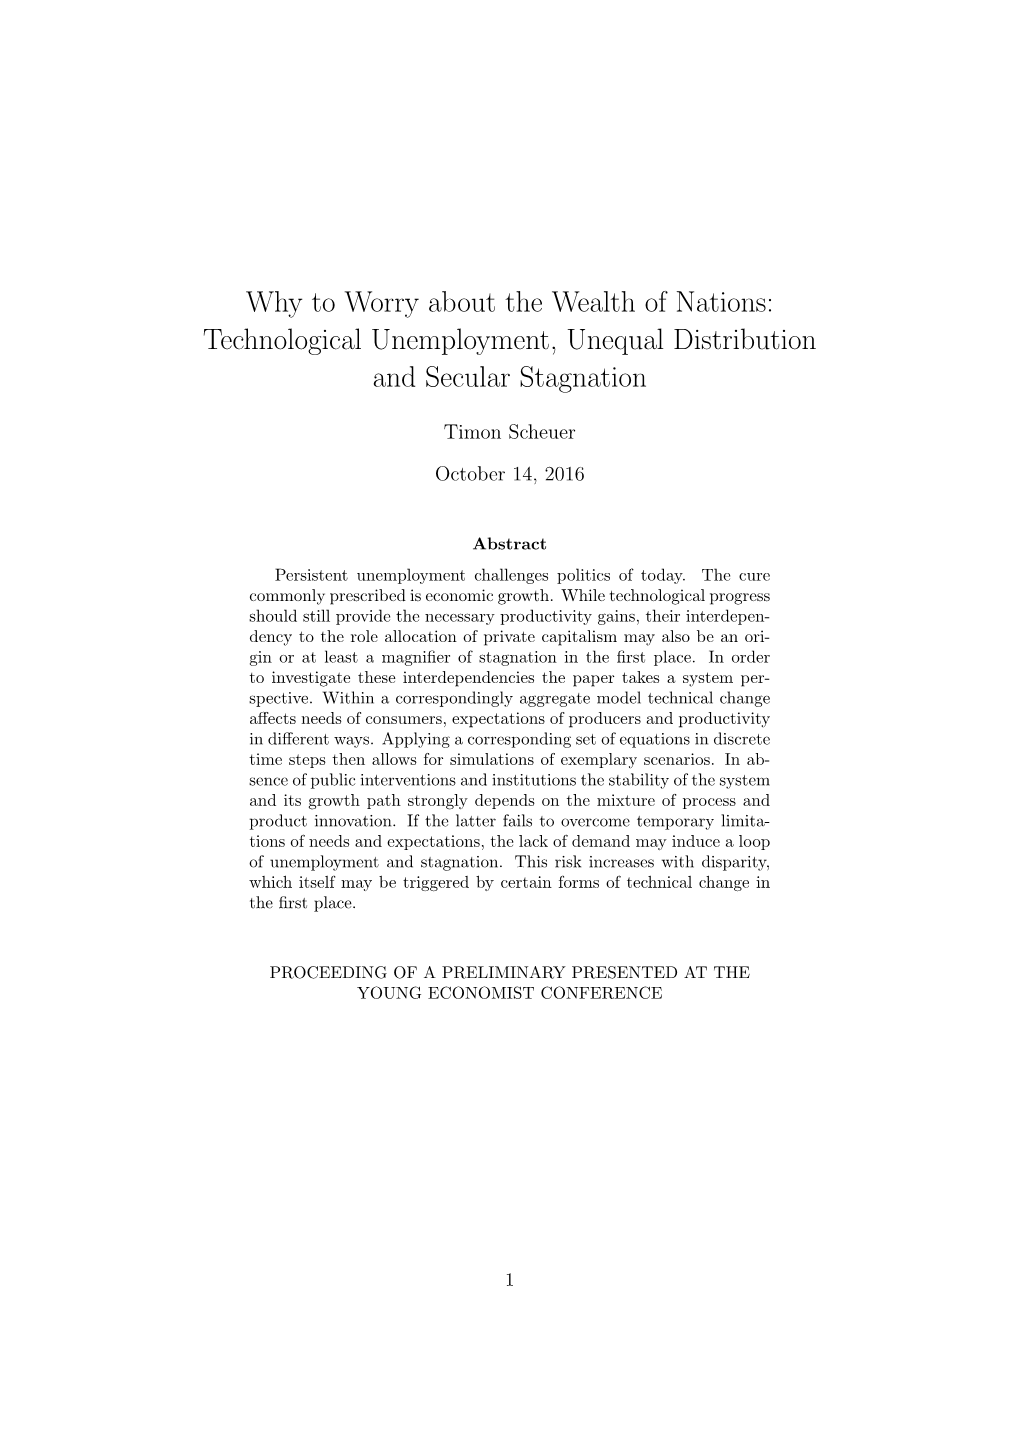 Why to Worry About the Wealth of Nations: Technological Unemployment, Unequal Distribution and Secular Stagnation